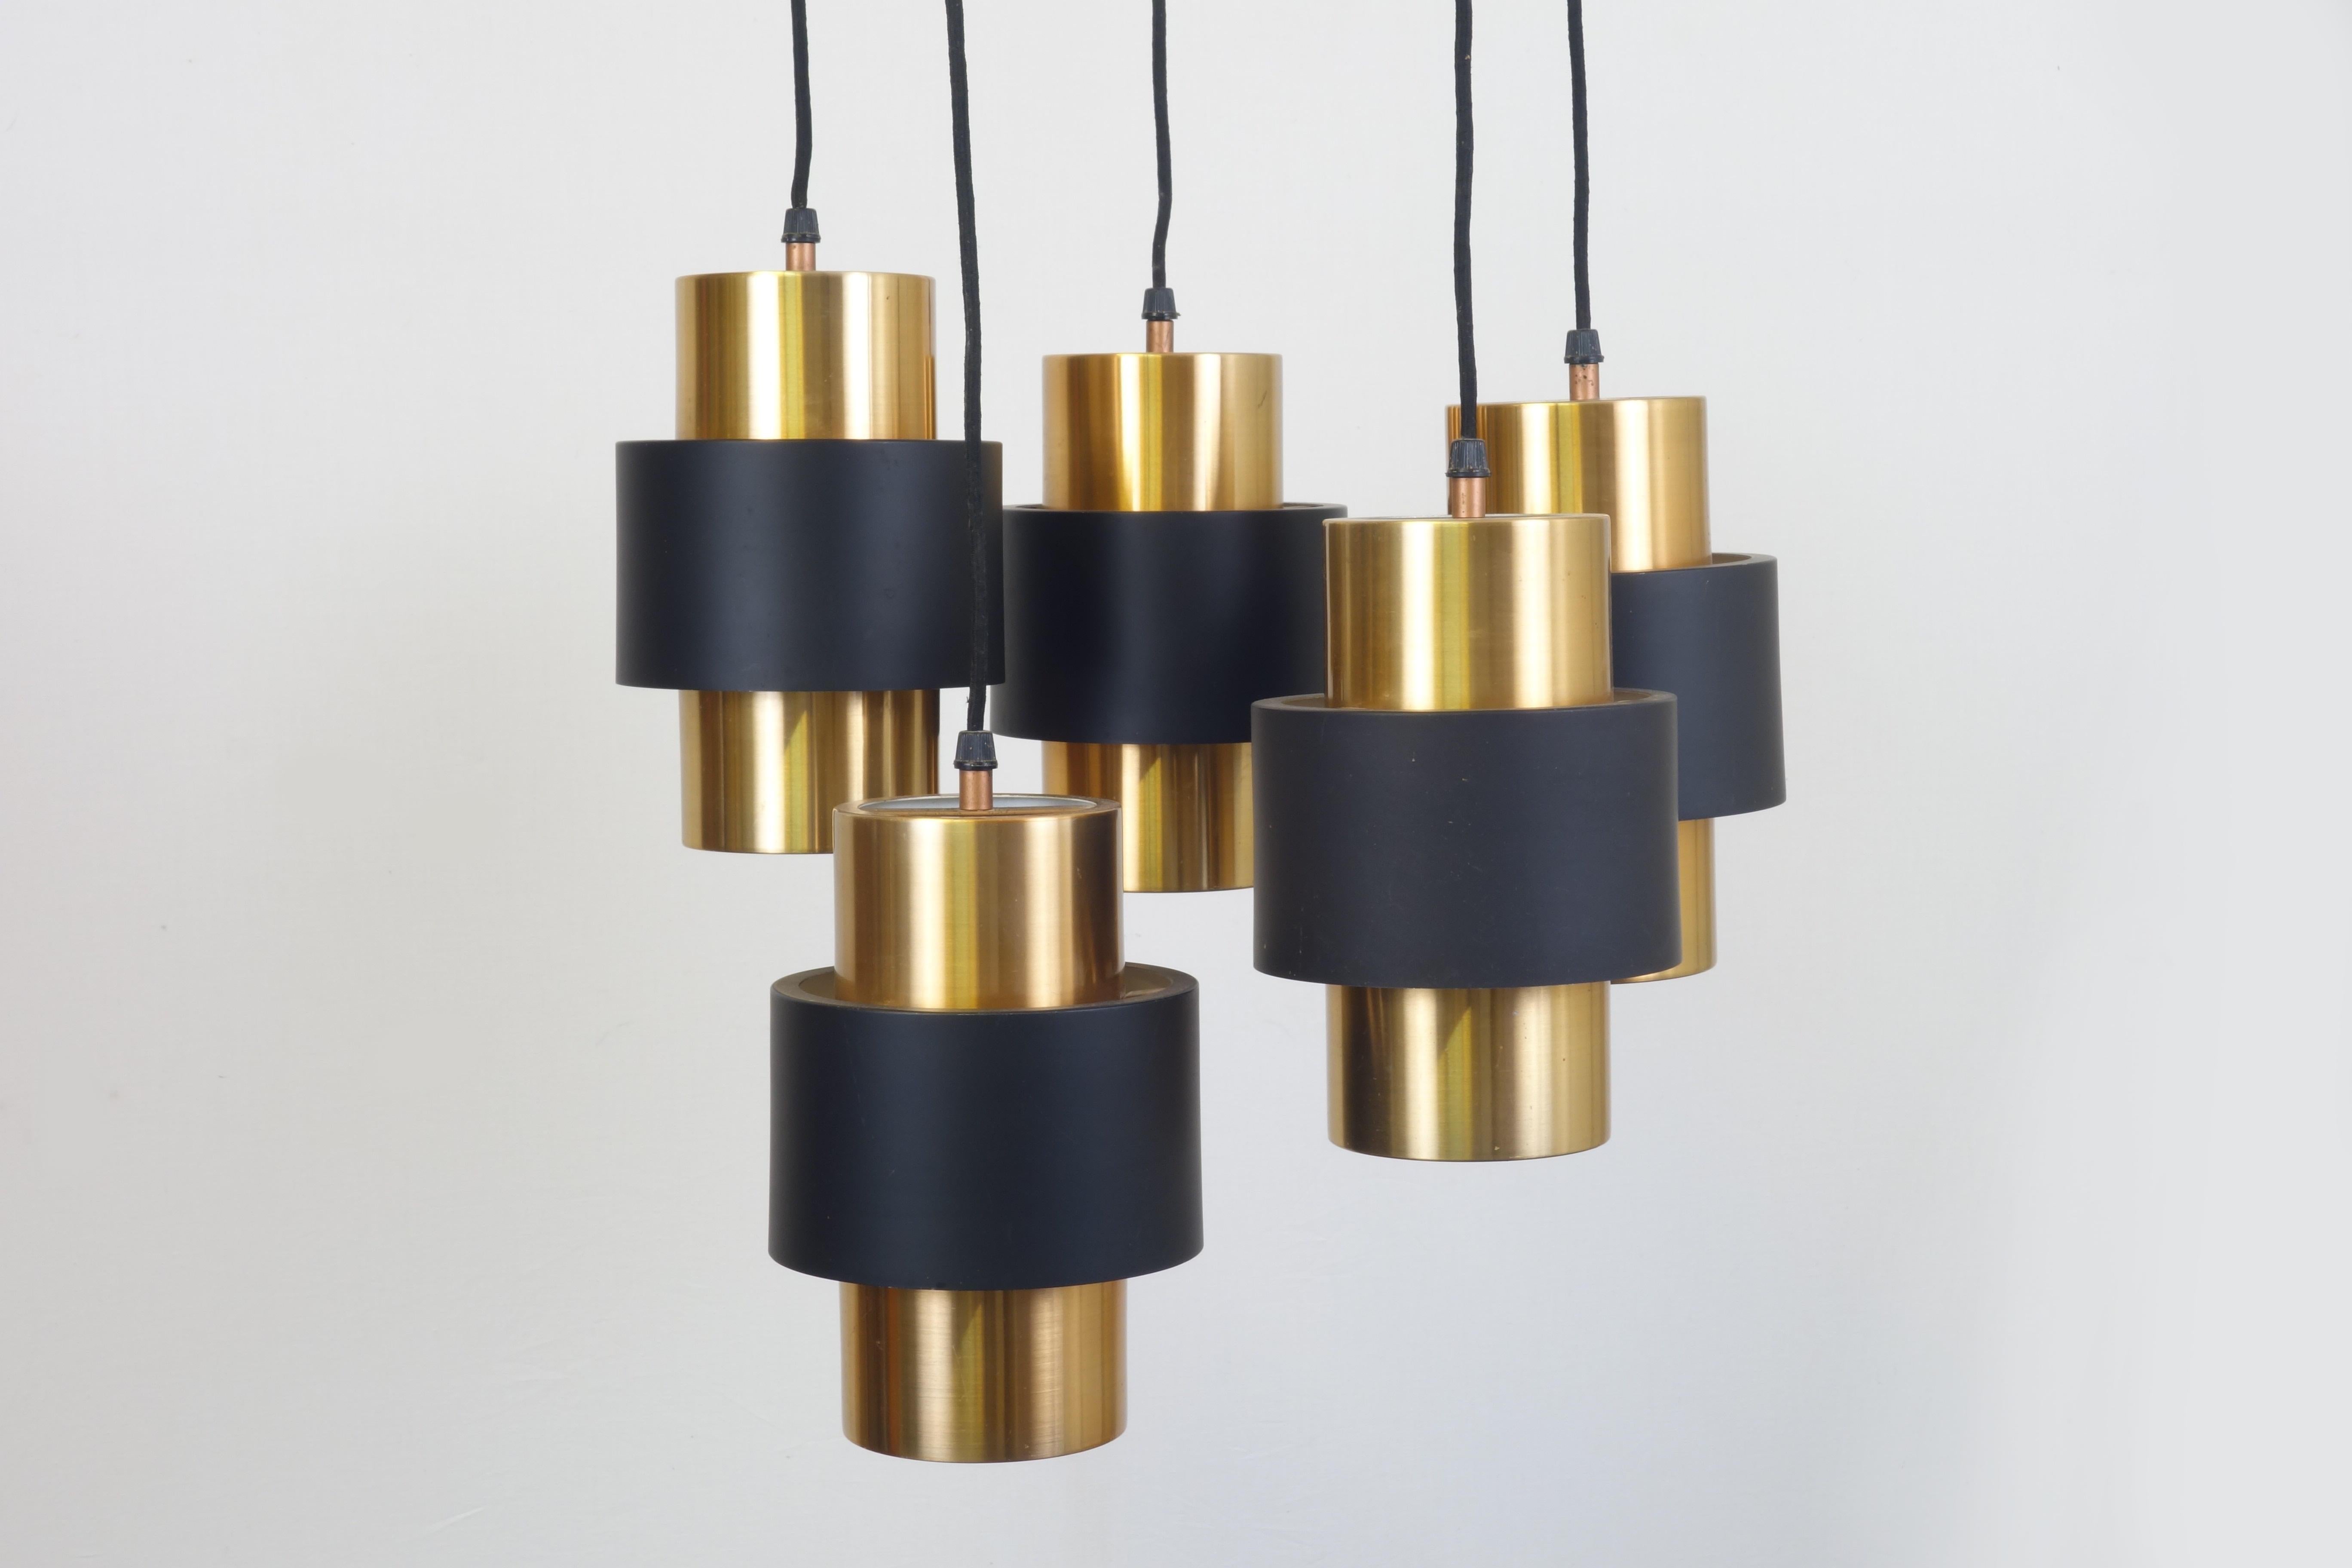 Elegant chandelier designed by Jo Hammerborg, Denmark, 1970s. Central hanger assembly carries 4-light fixtures of brushed copper and blackened metal containing each one bulb. The height of each fixture of this stunning object can be varied